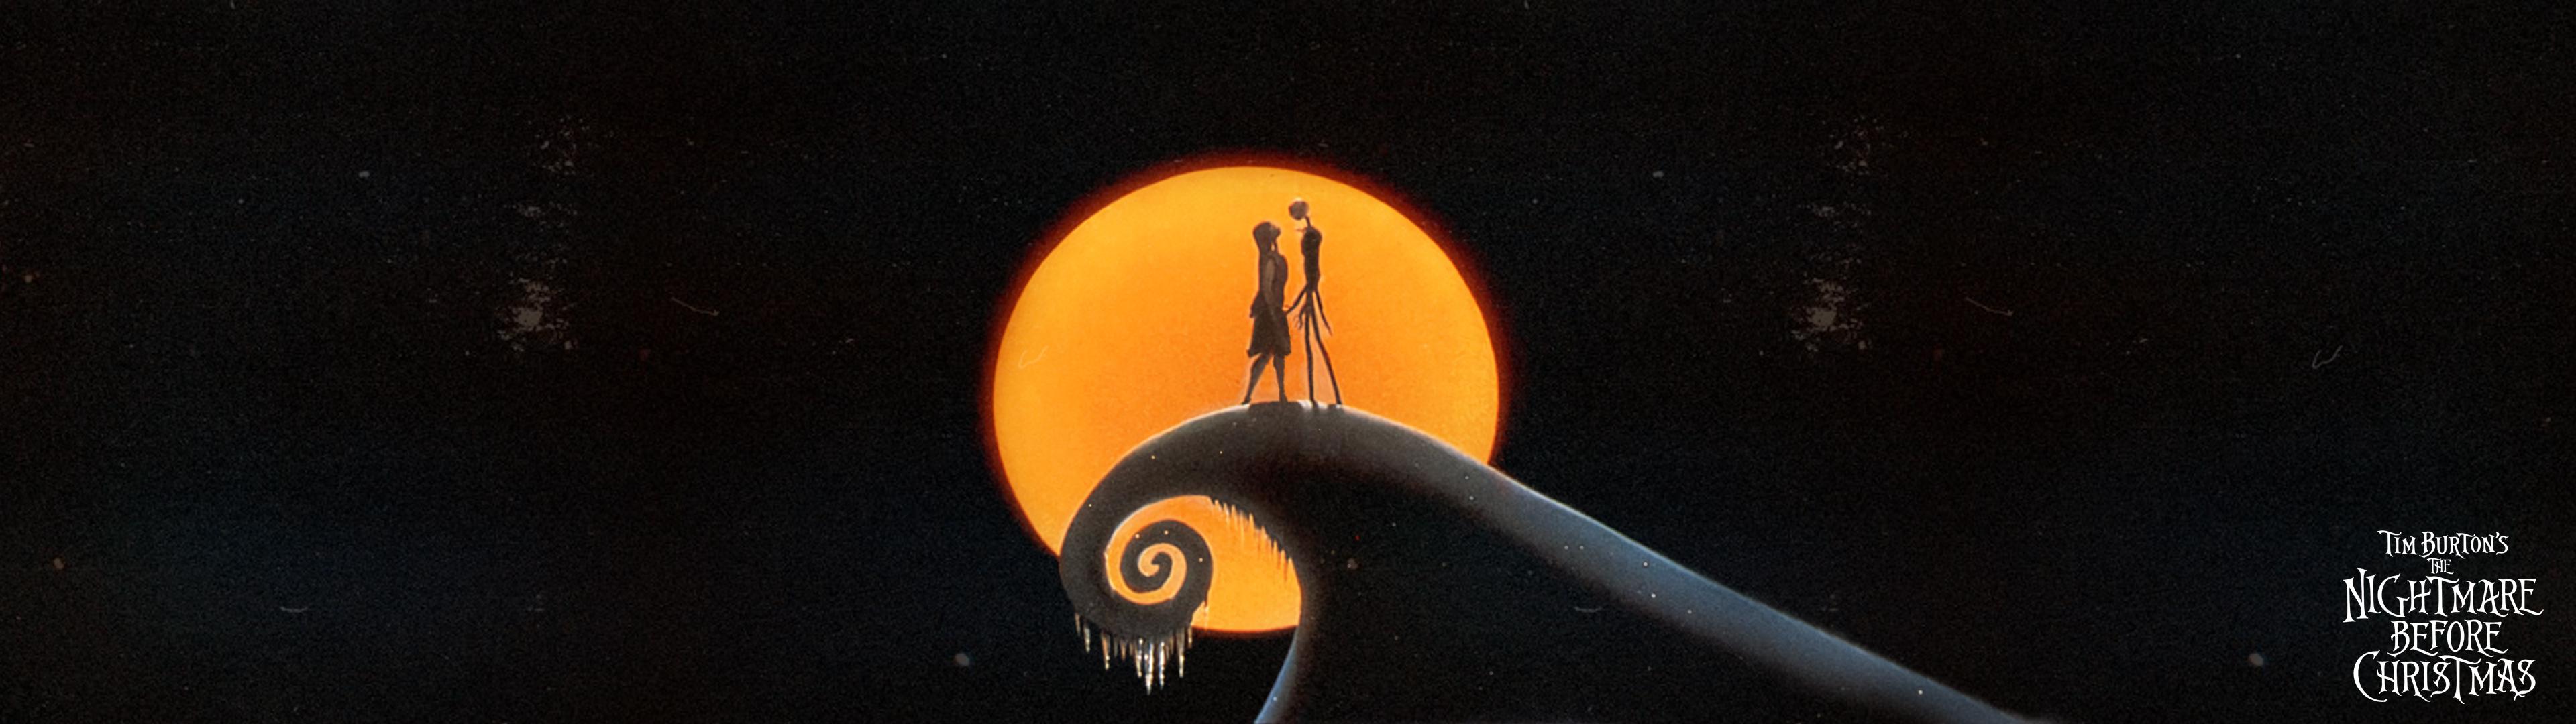 Dual Monitor Nightmare Before Christmas Wallpaper I spent a couple of hours making because apparently one doesn't exist! [3840x1080]